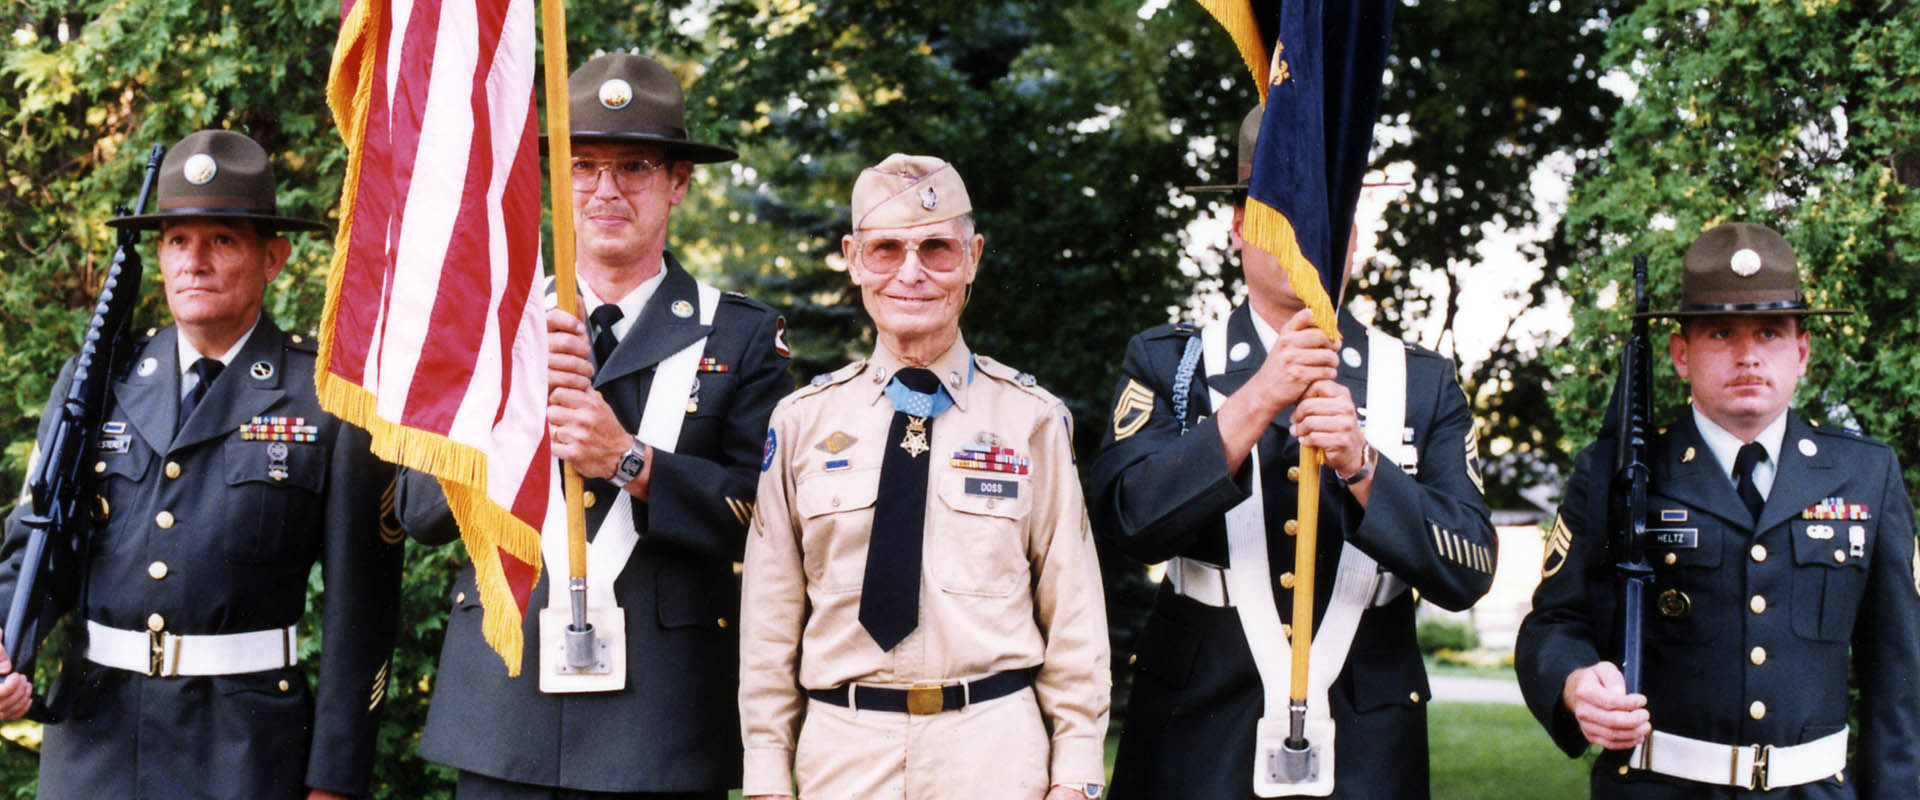 the story of Private Desmond Doss is true